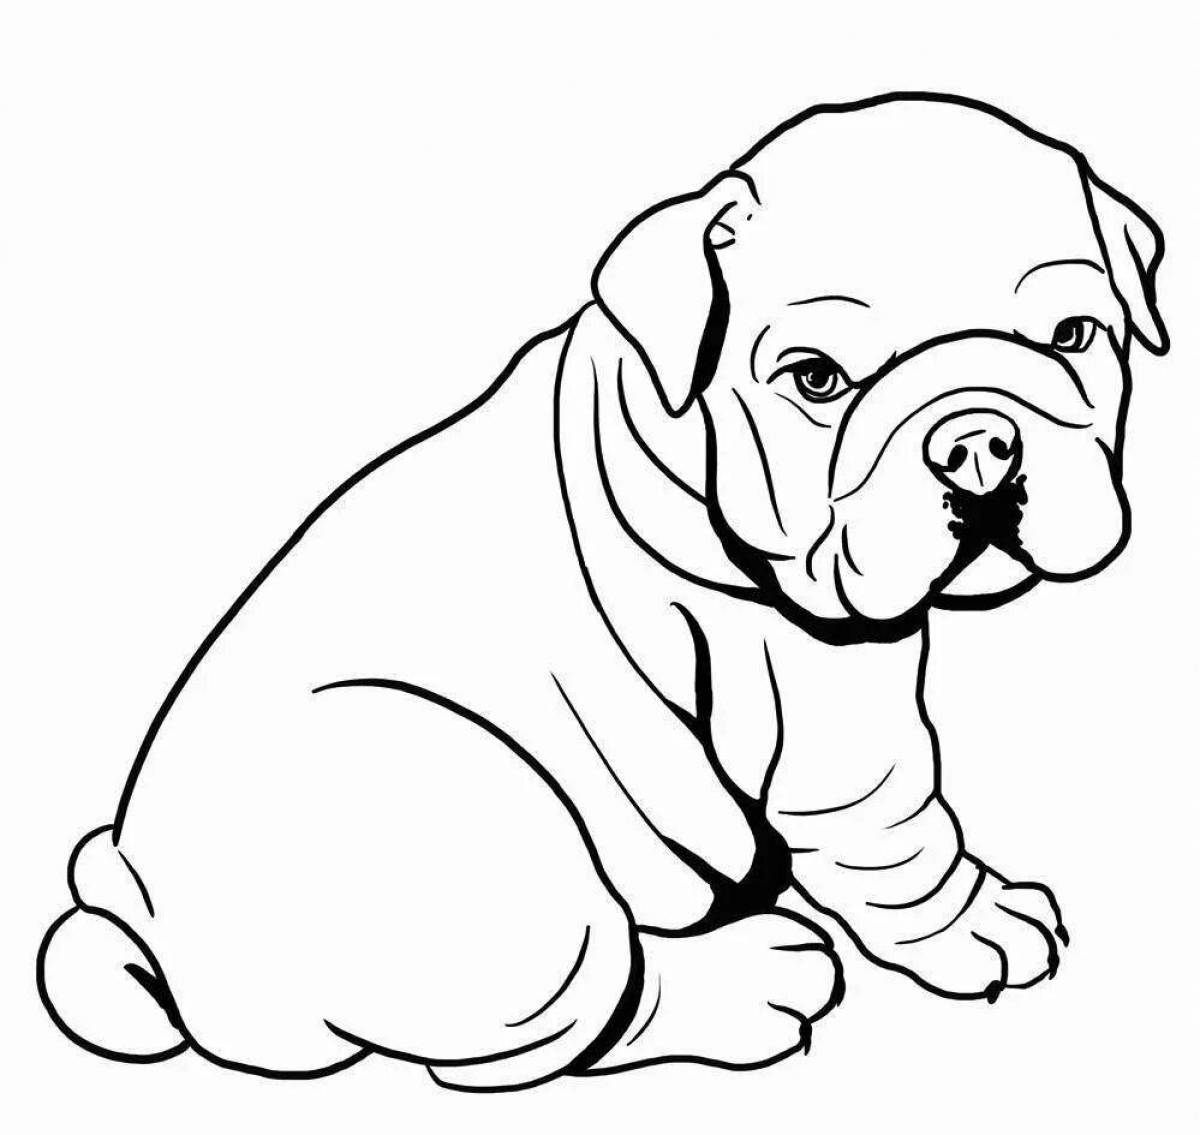 Wiggly bulldog coloring book for kids